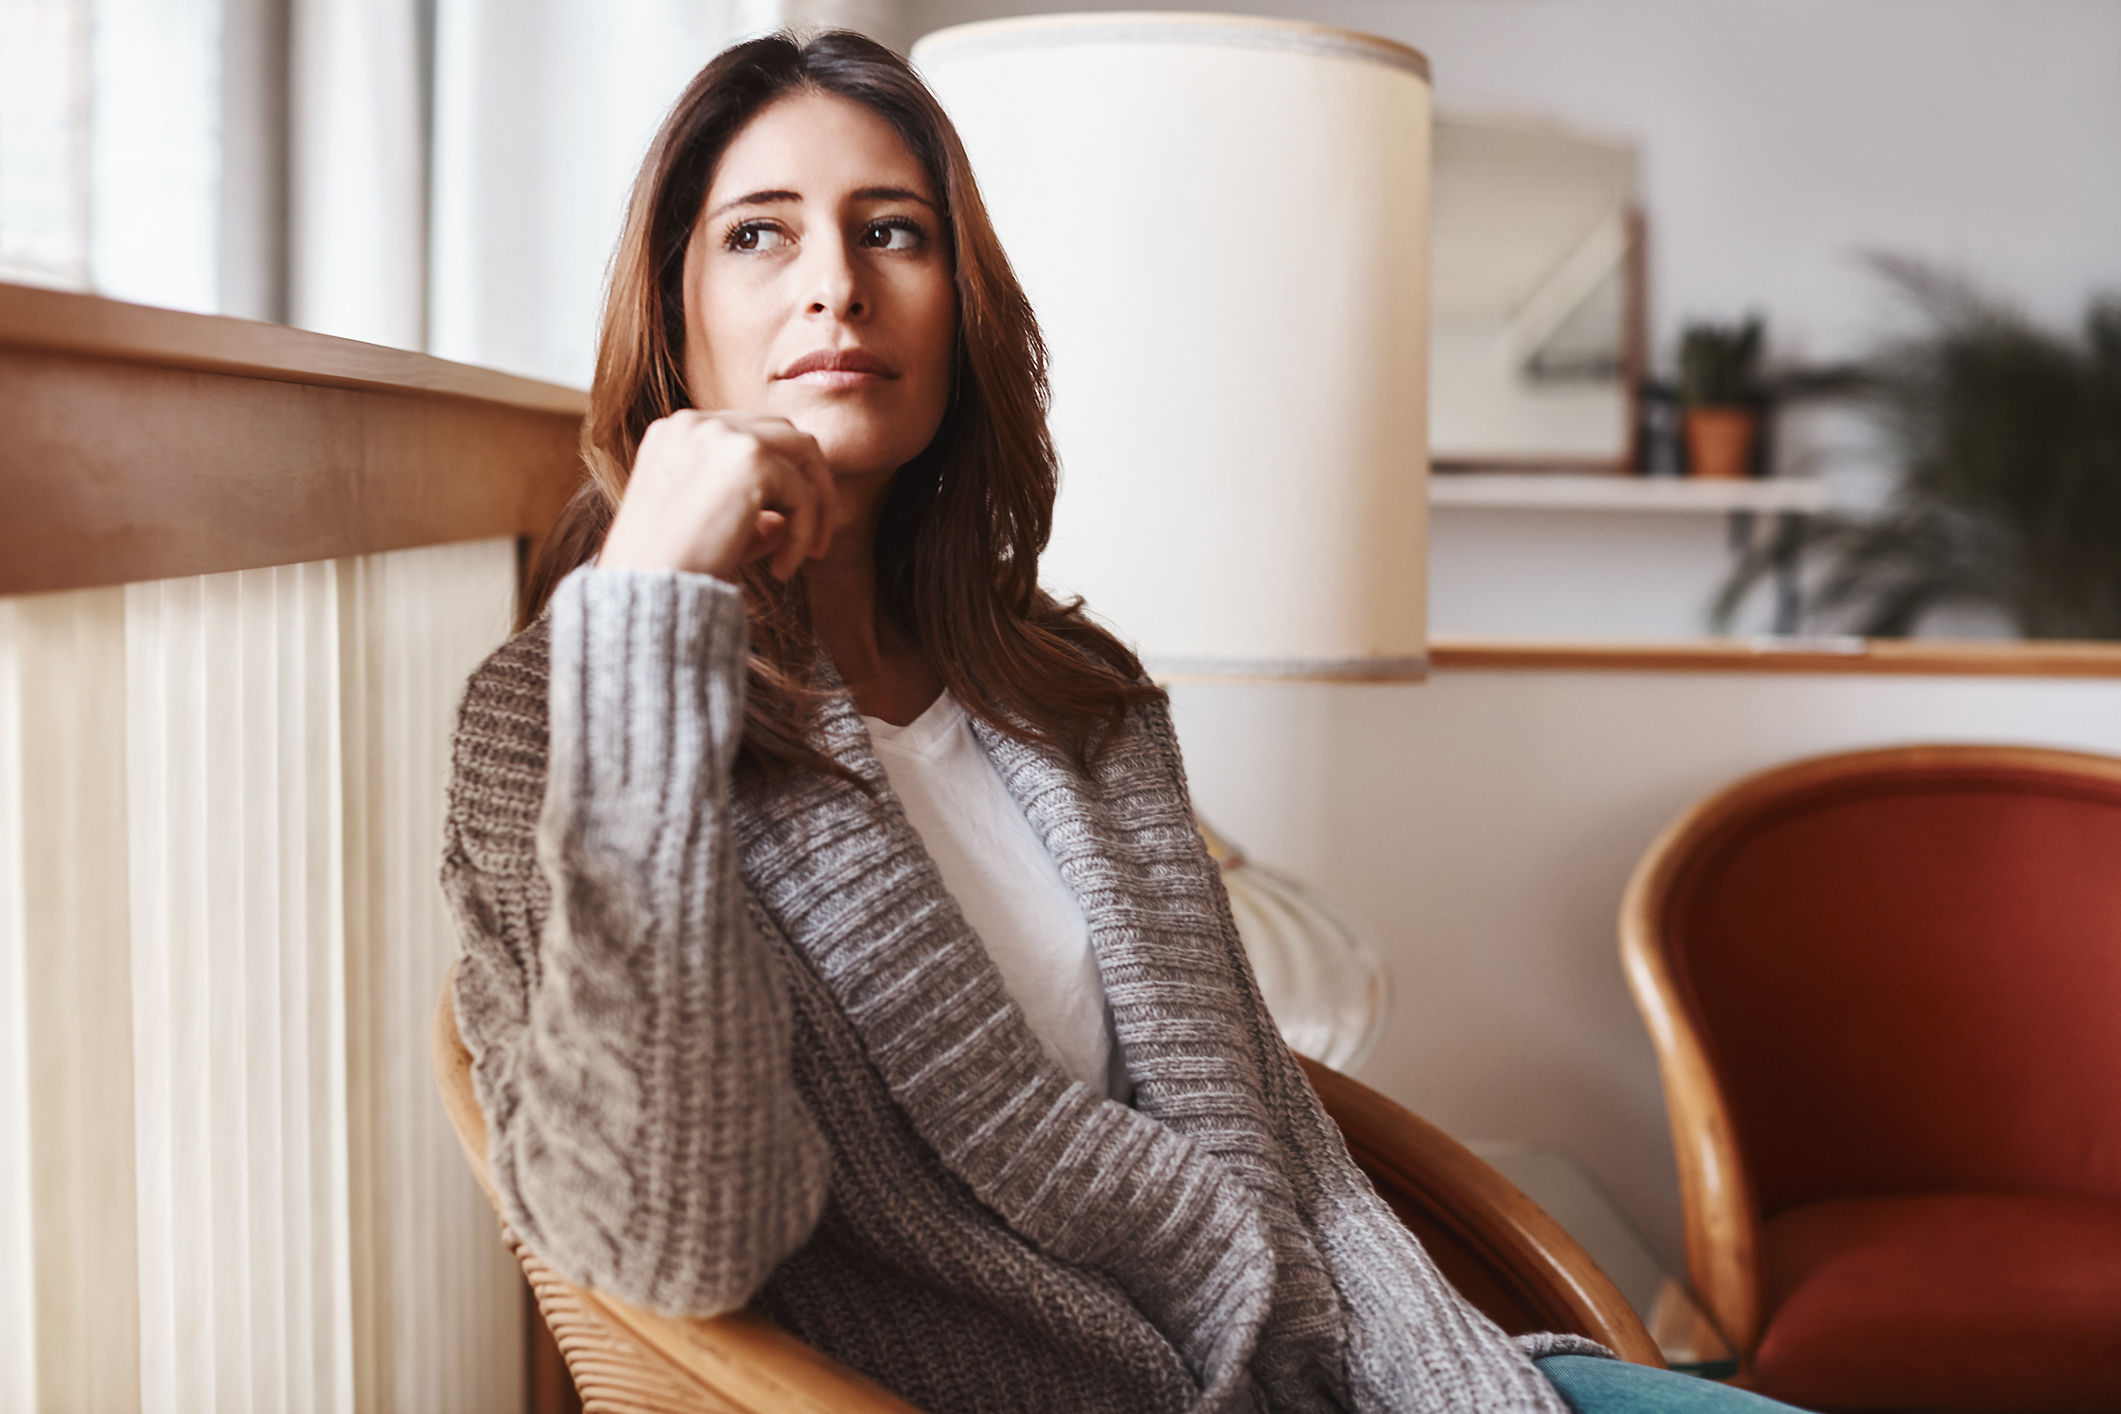 Woman in a sweater sitting thoughtfully in a chair, looking away